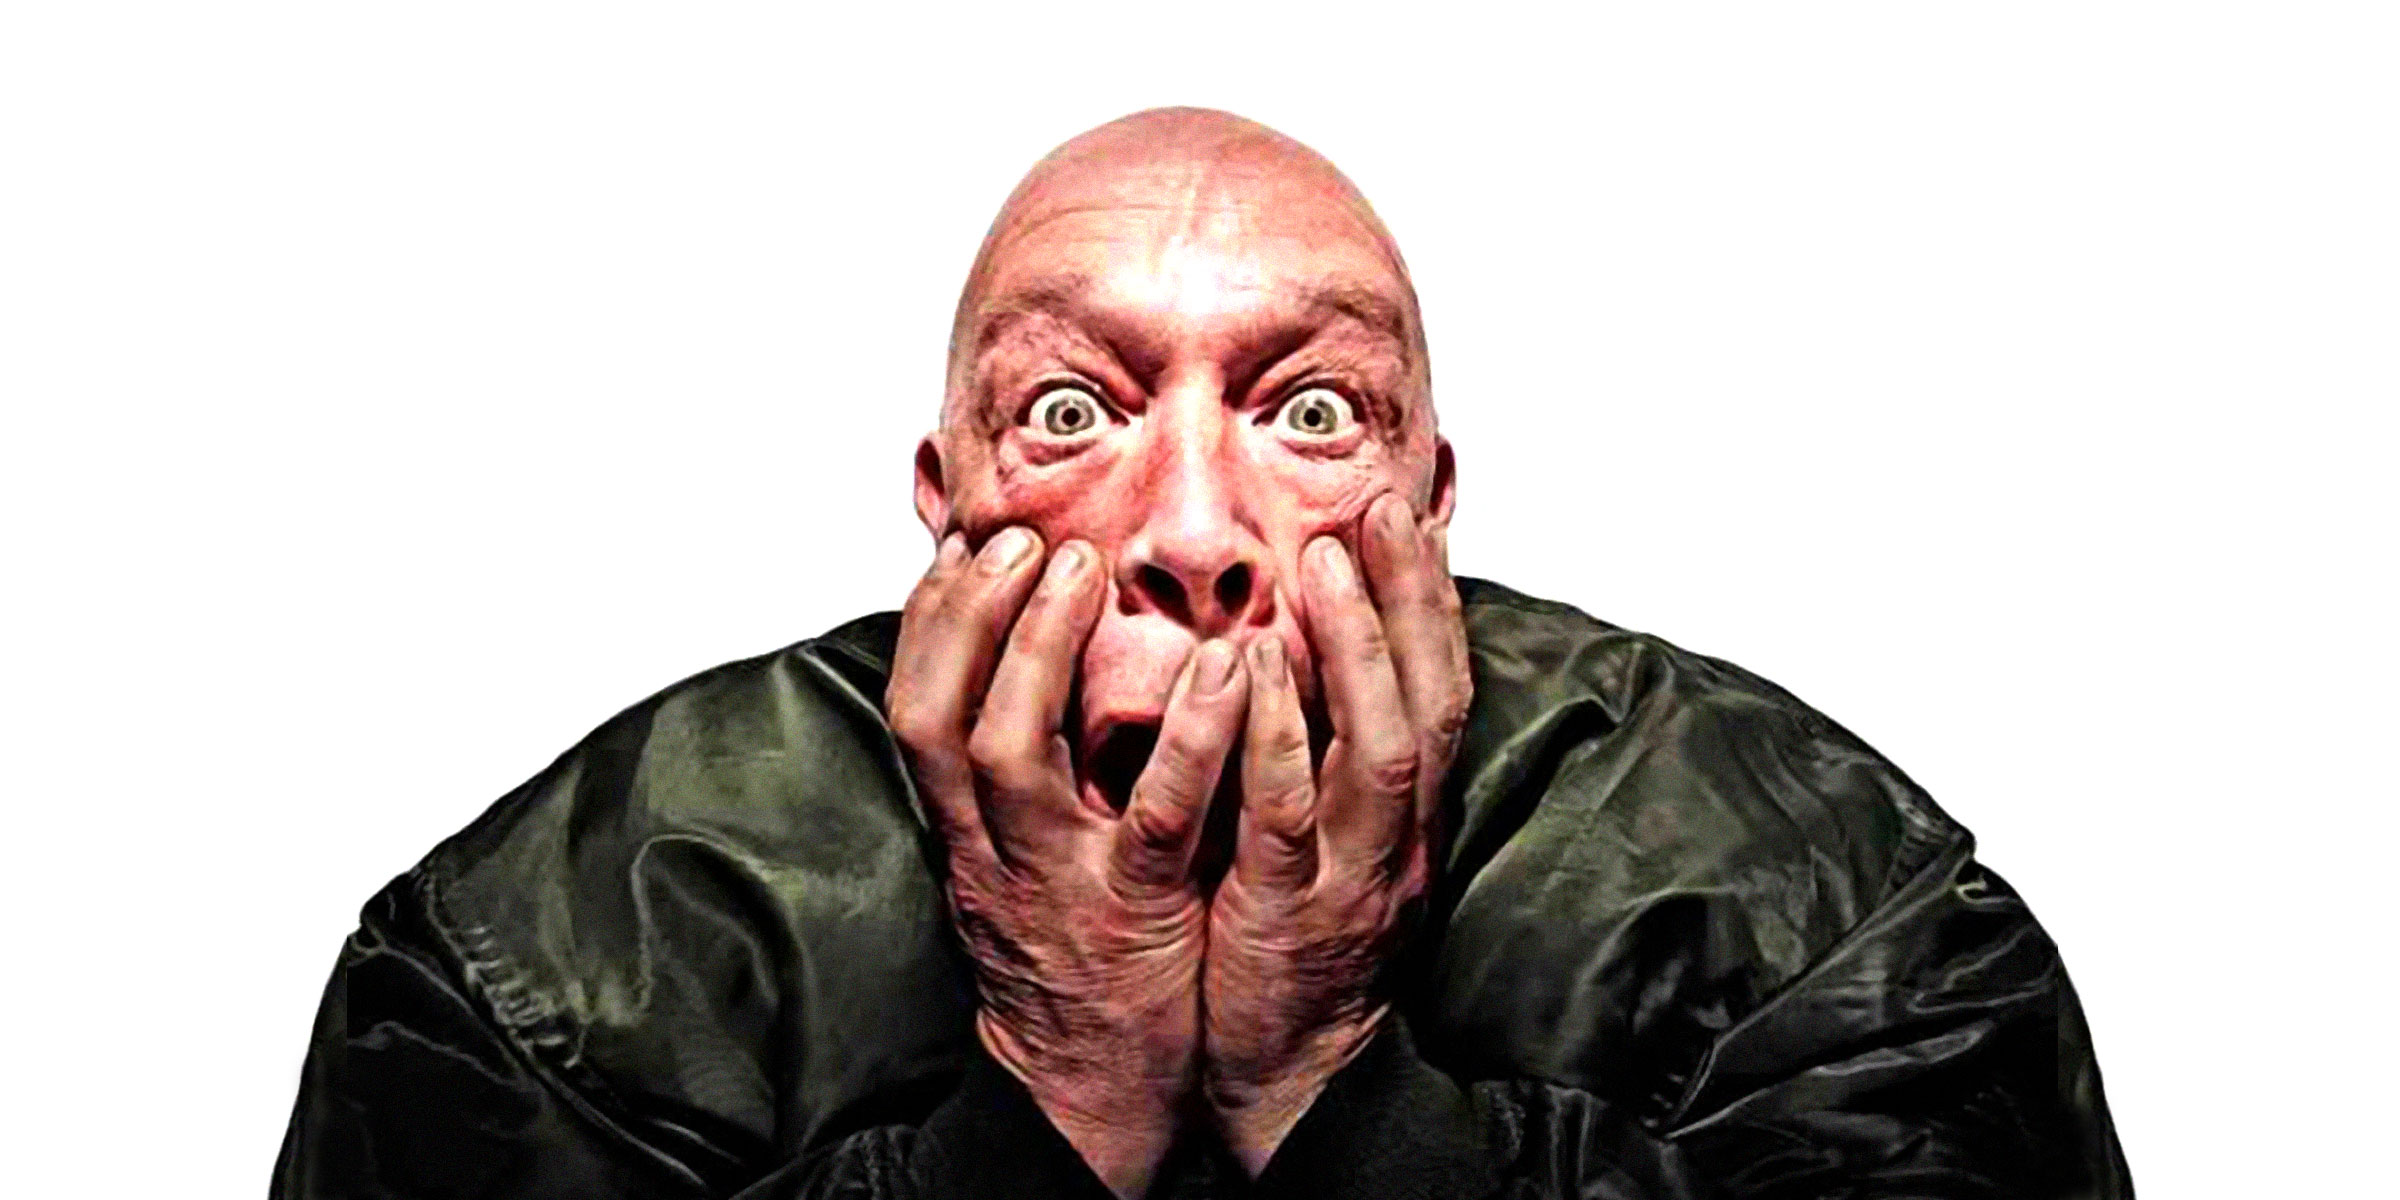 Bad manners 2020 tour dates